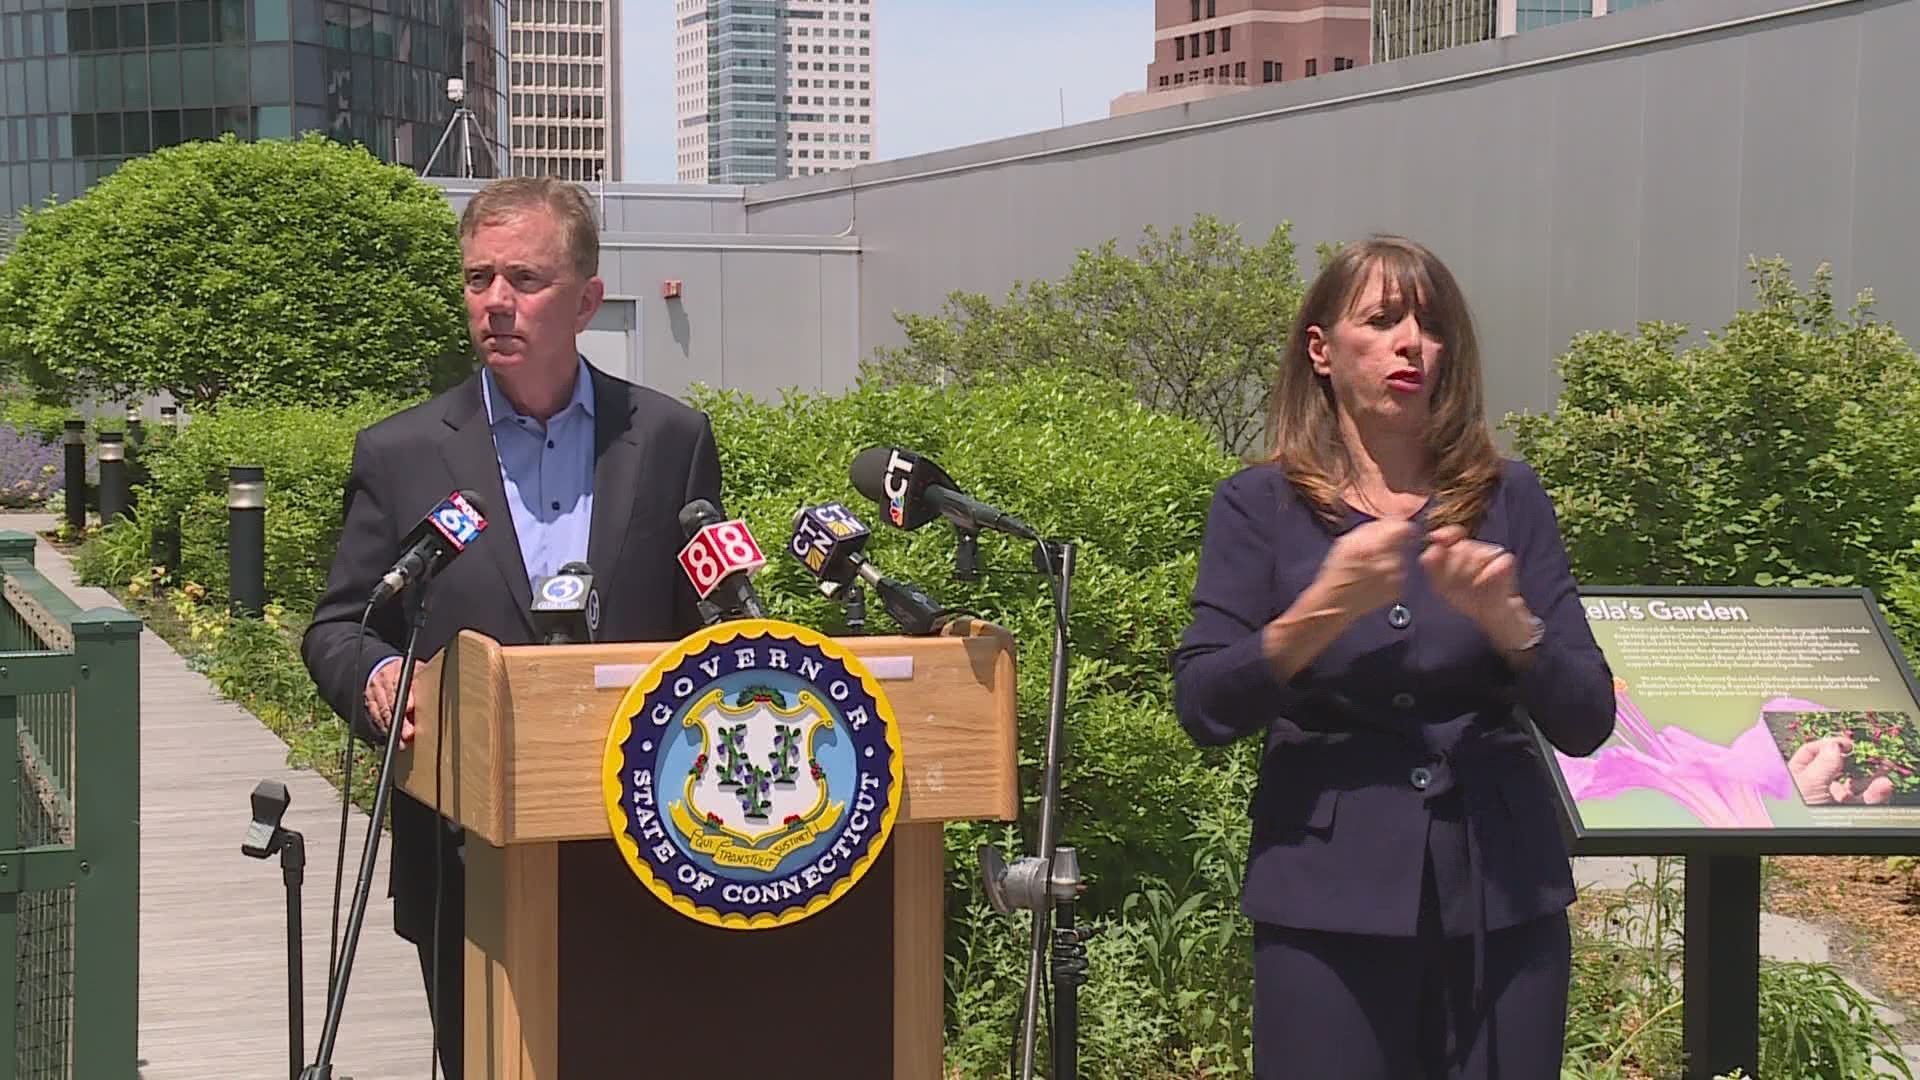 The briefing was held outside on the plaza level of the Connecticut Science Center. Gov. Lamont was be joined by its president and CEO.